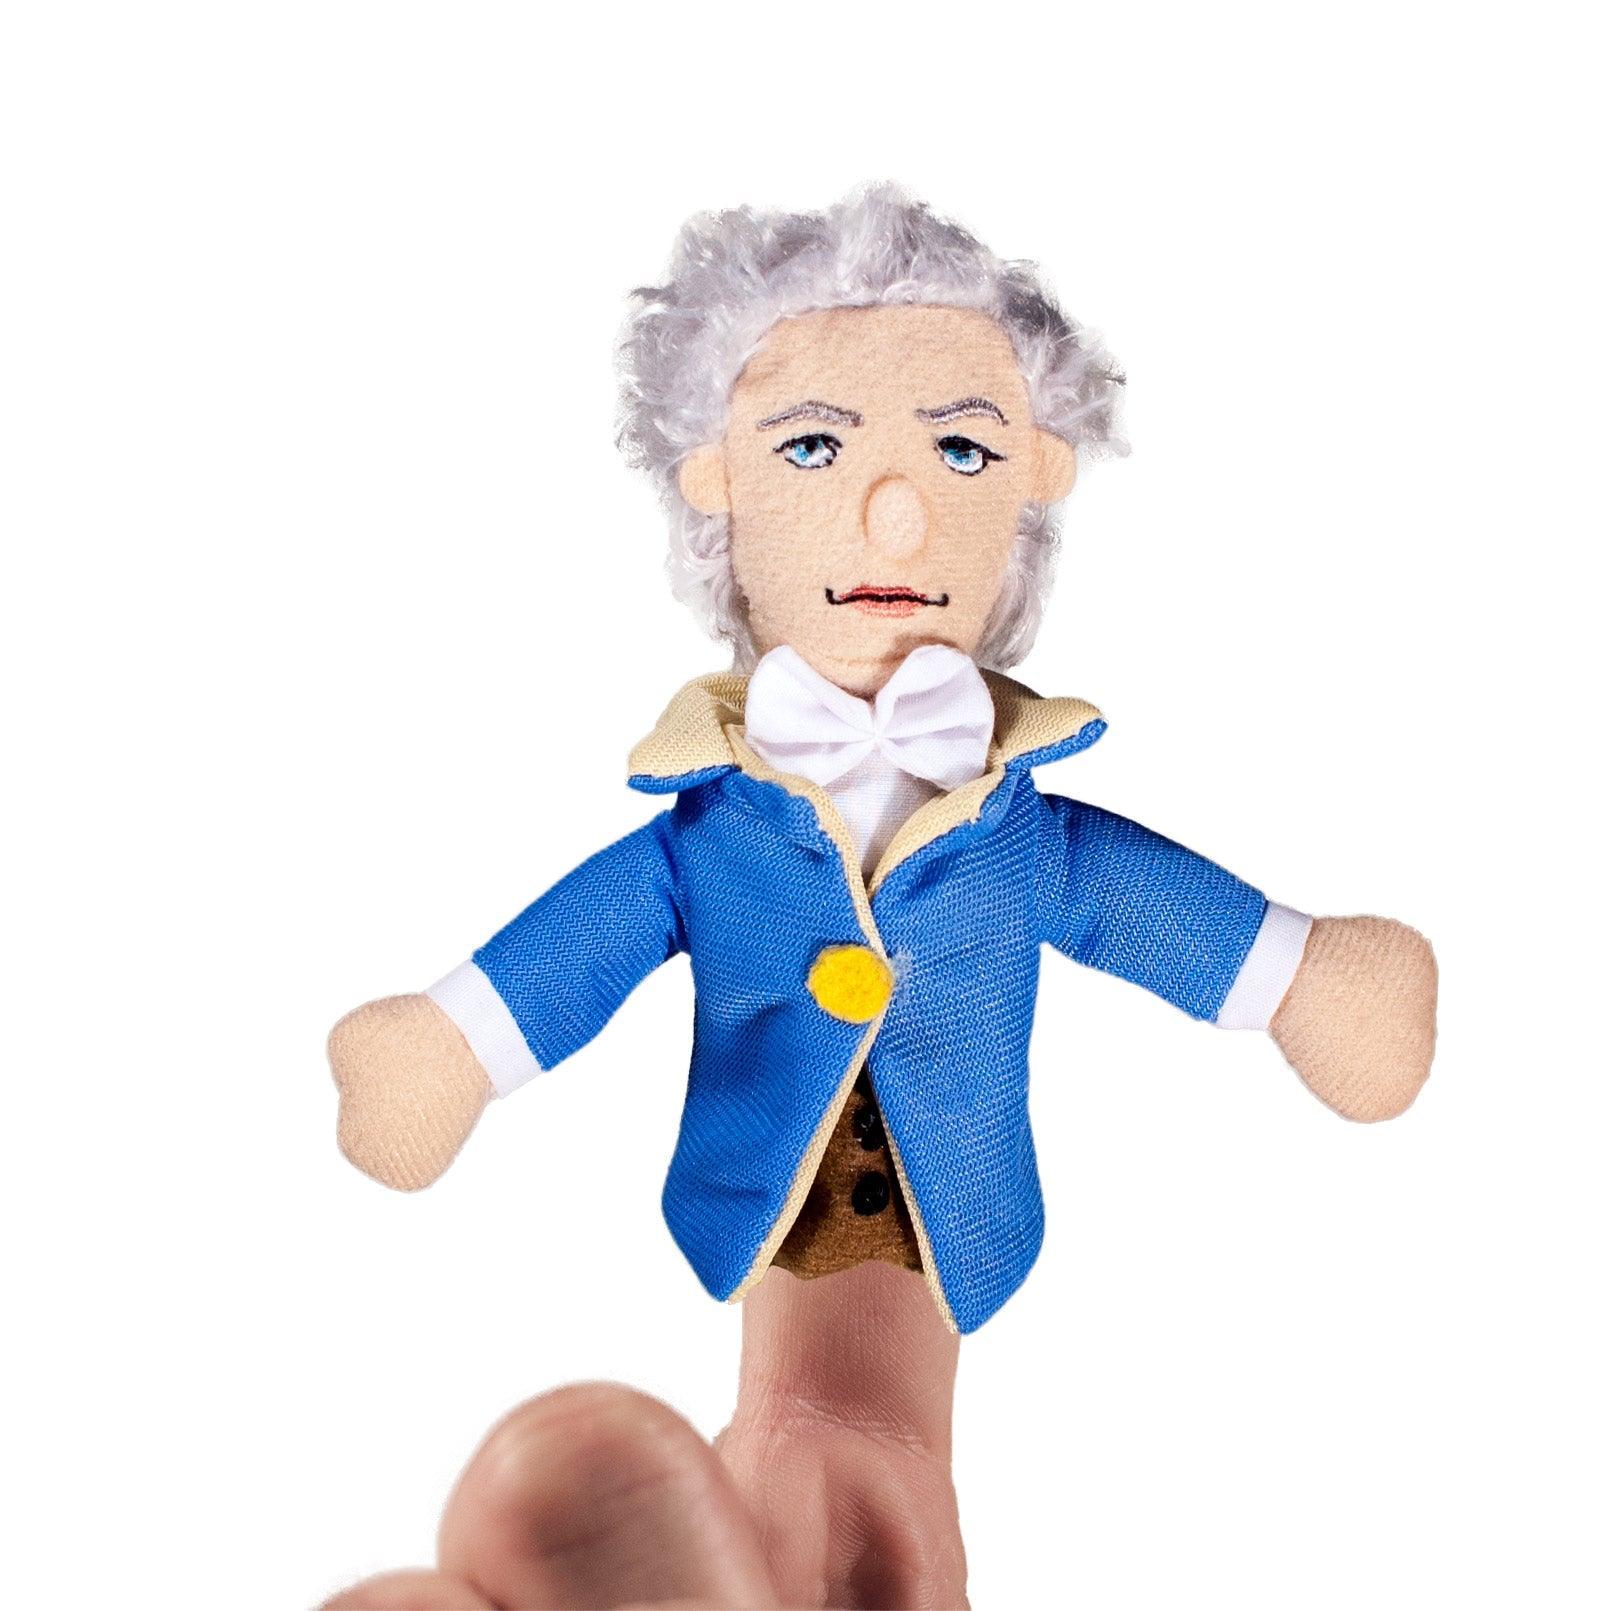 Product photo of Alexander Hamilton Finger Puppet, a novelty gift manufactured by The Unemployed Philosophers Guild.